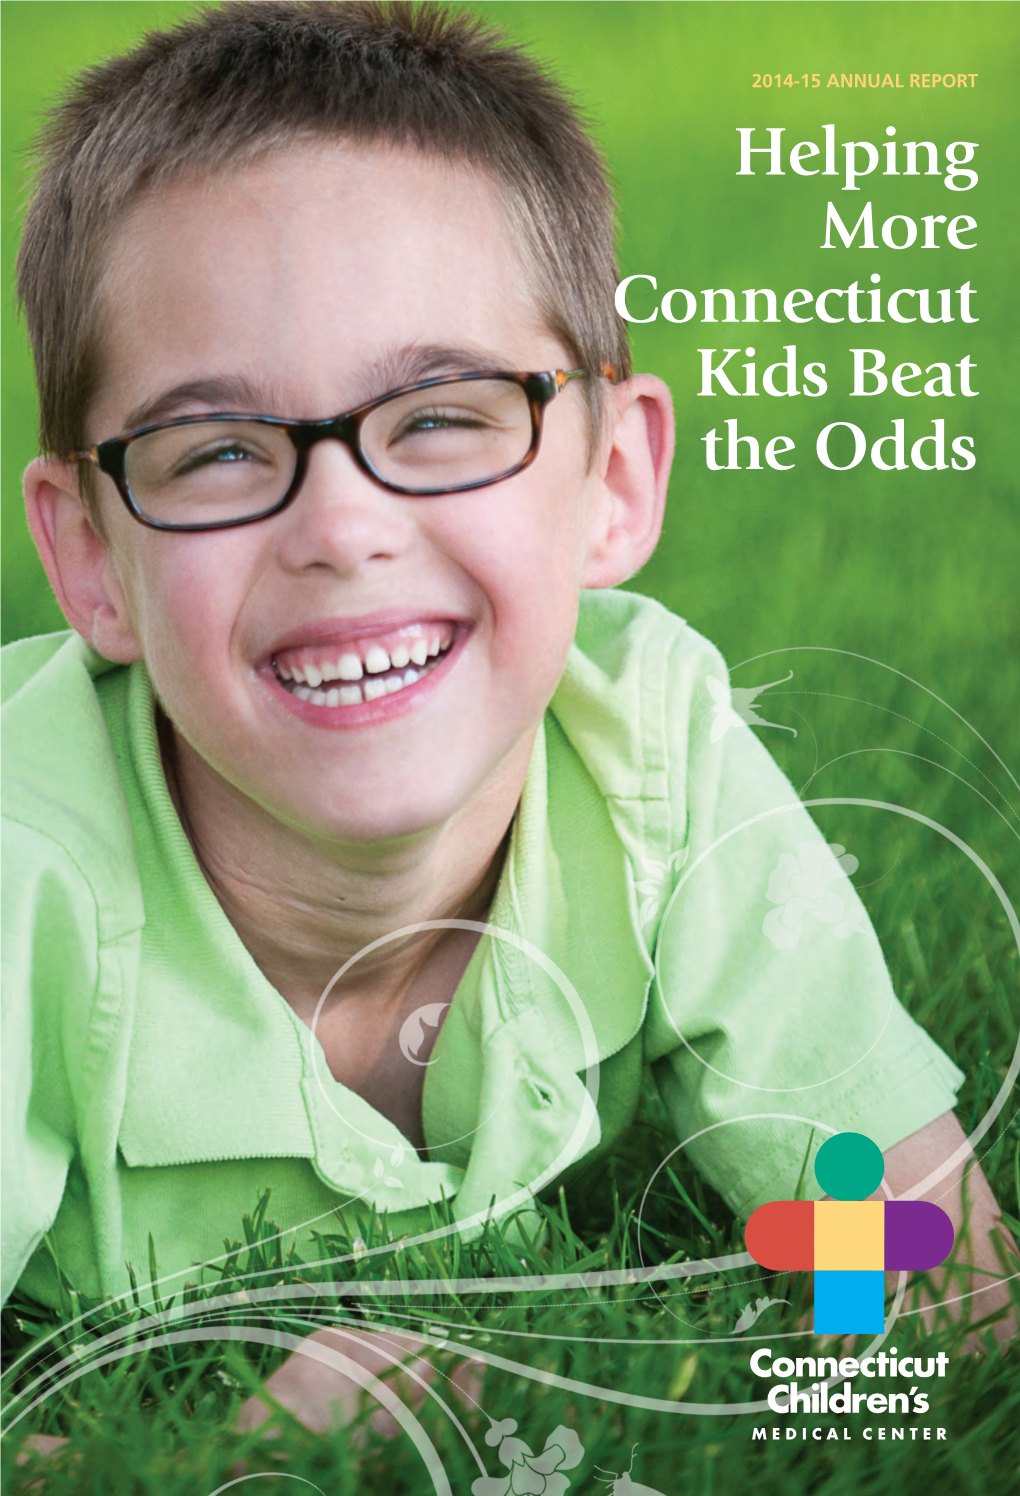 Helping More Connecticut Kids Beat the Odds